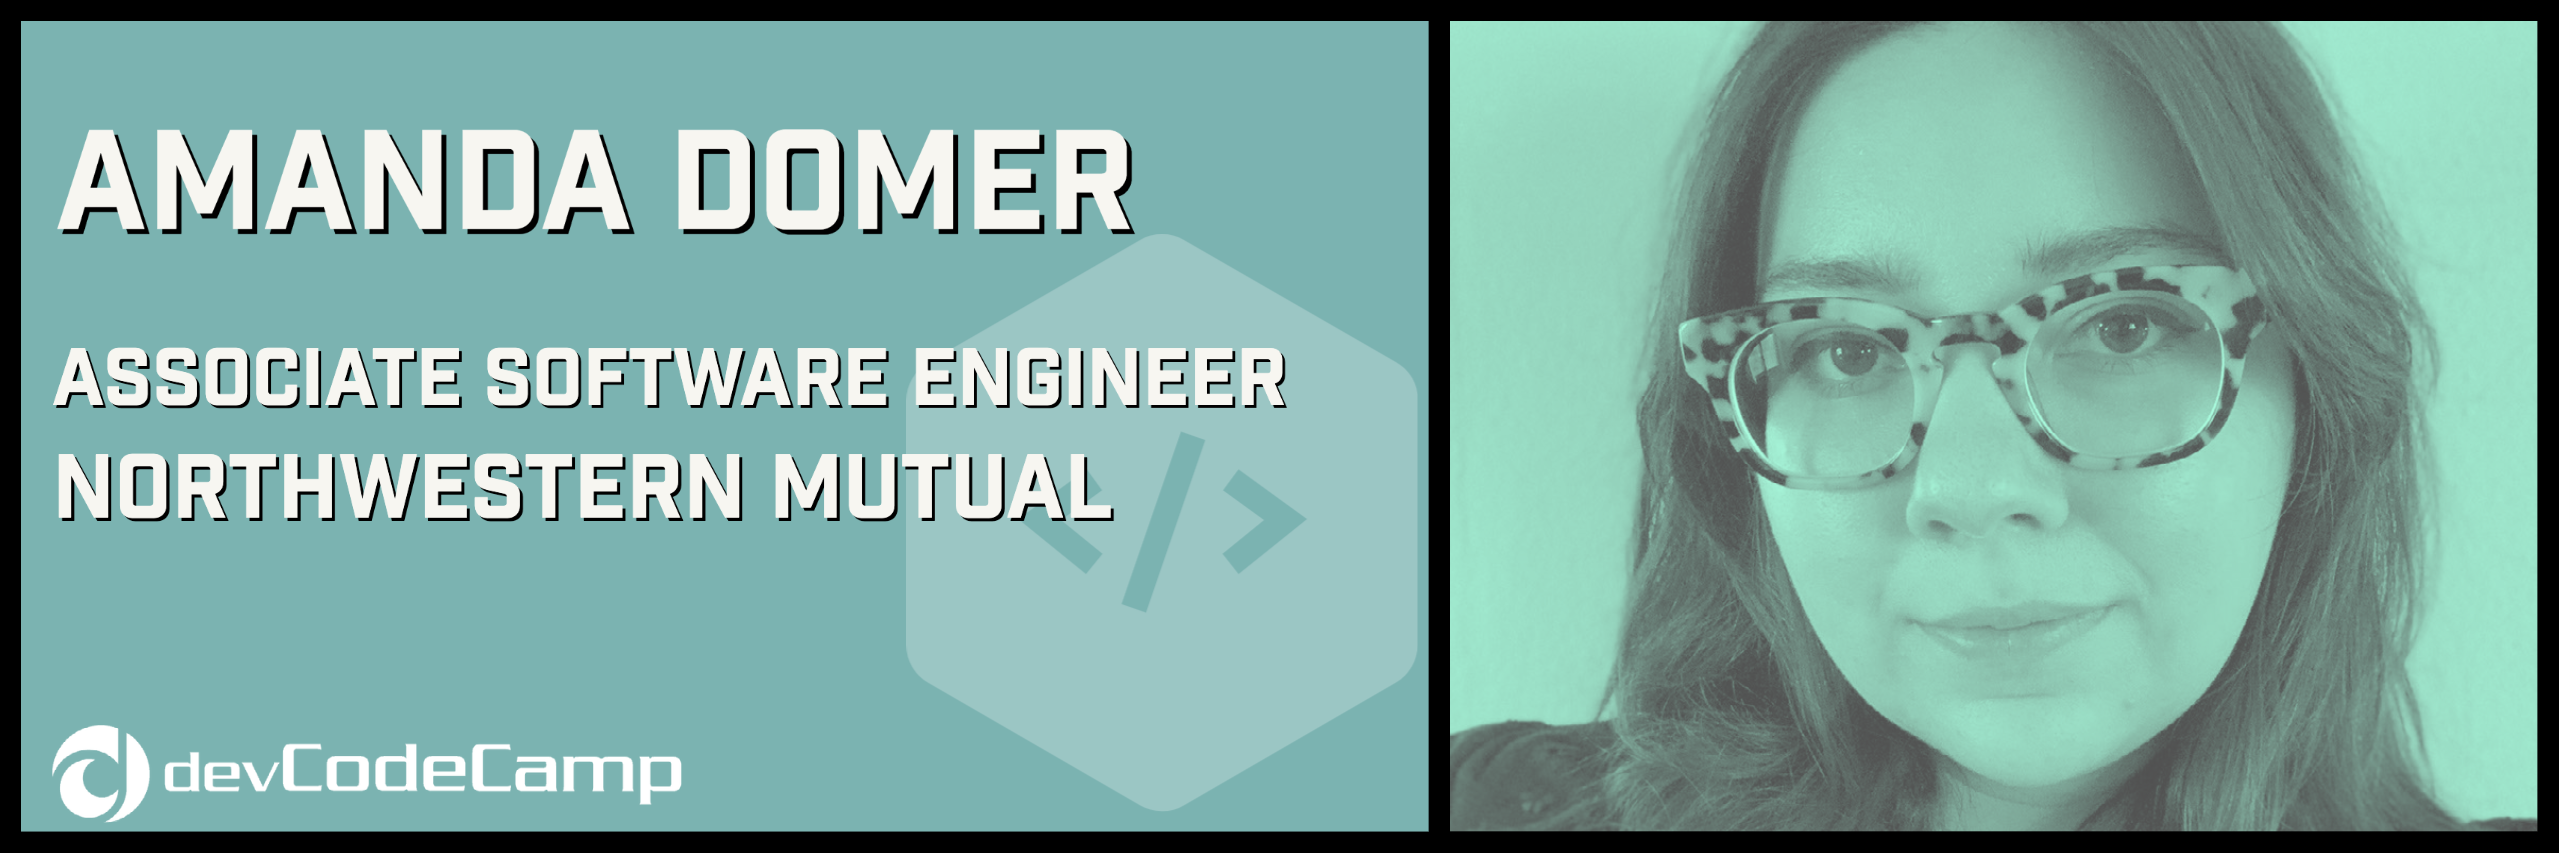 Online coding bootcamp devCodeCamp graduate who has successfully launched her career in code at Northwestern Mutual